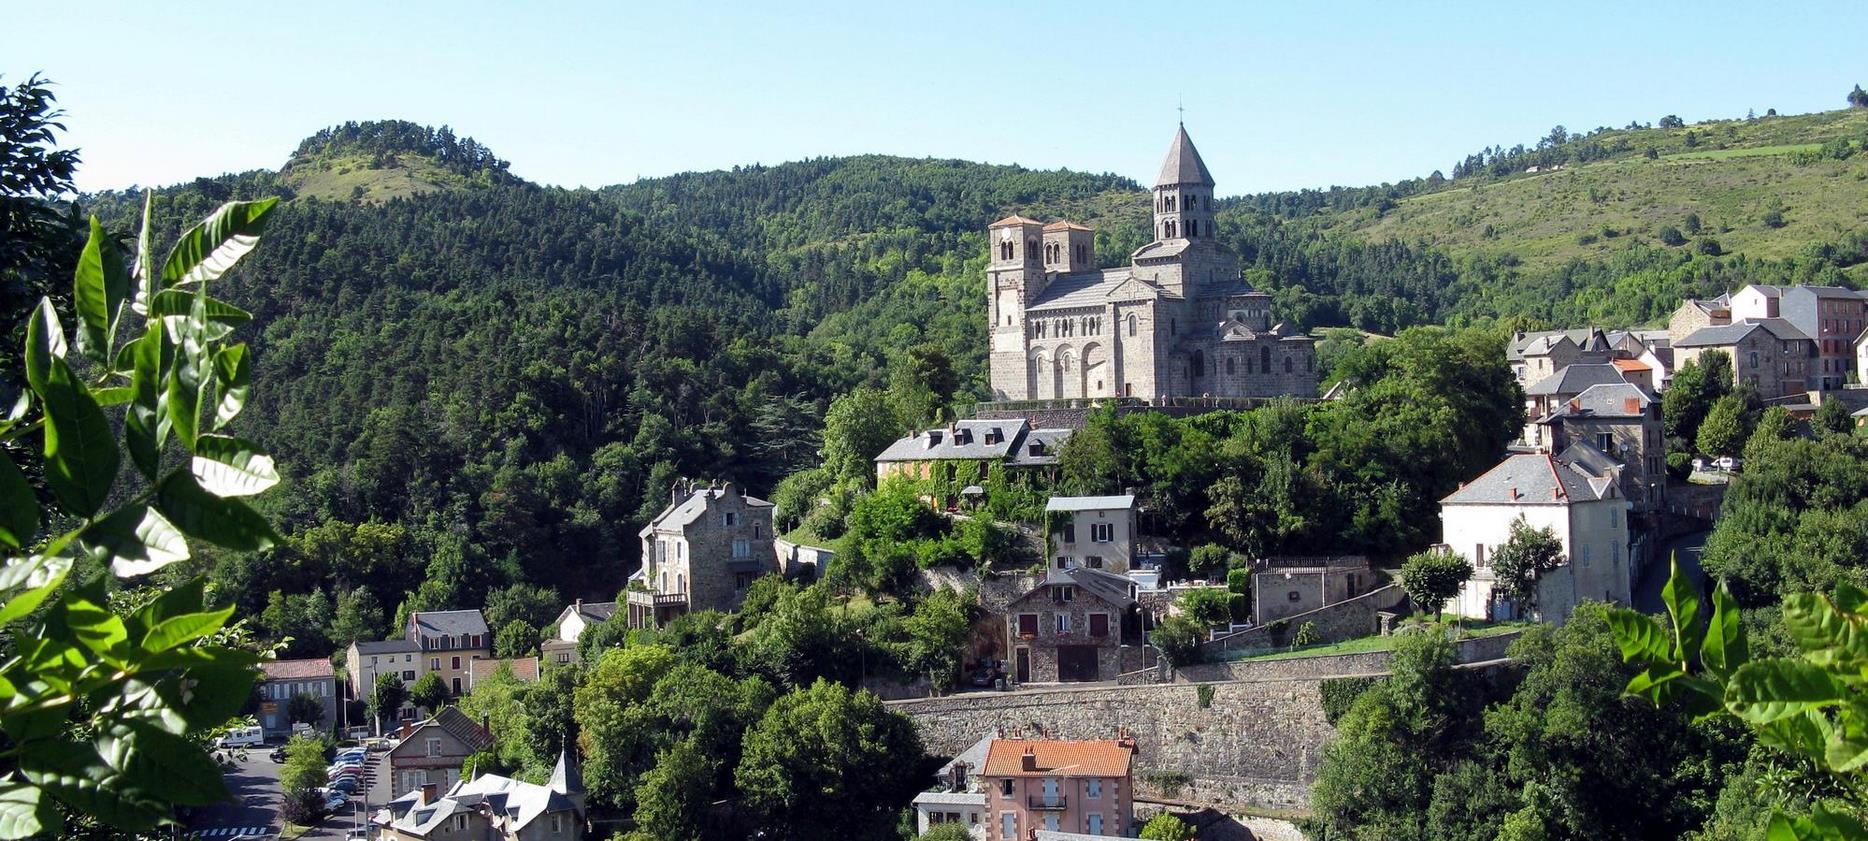 Saint Nectaire - Capital of the Saint Nectaire appellation